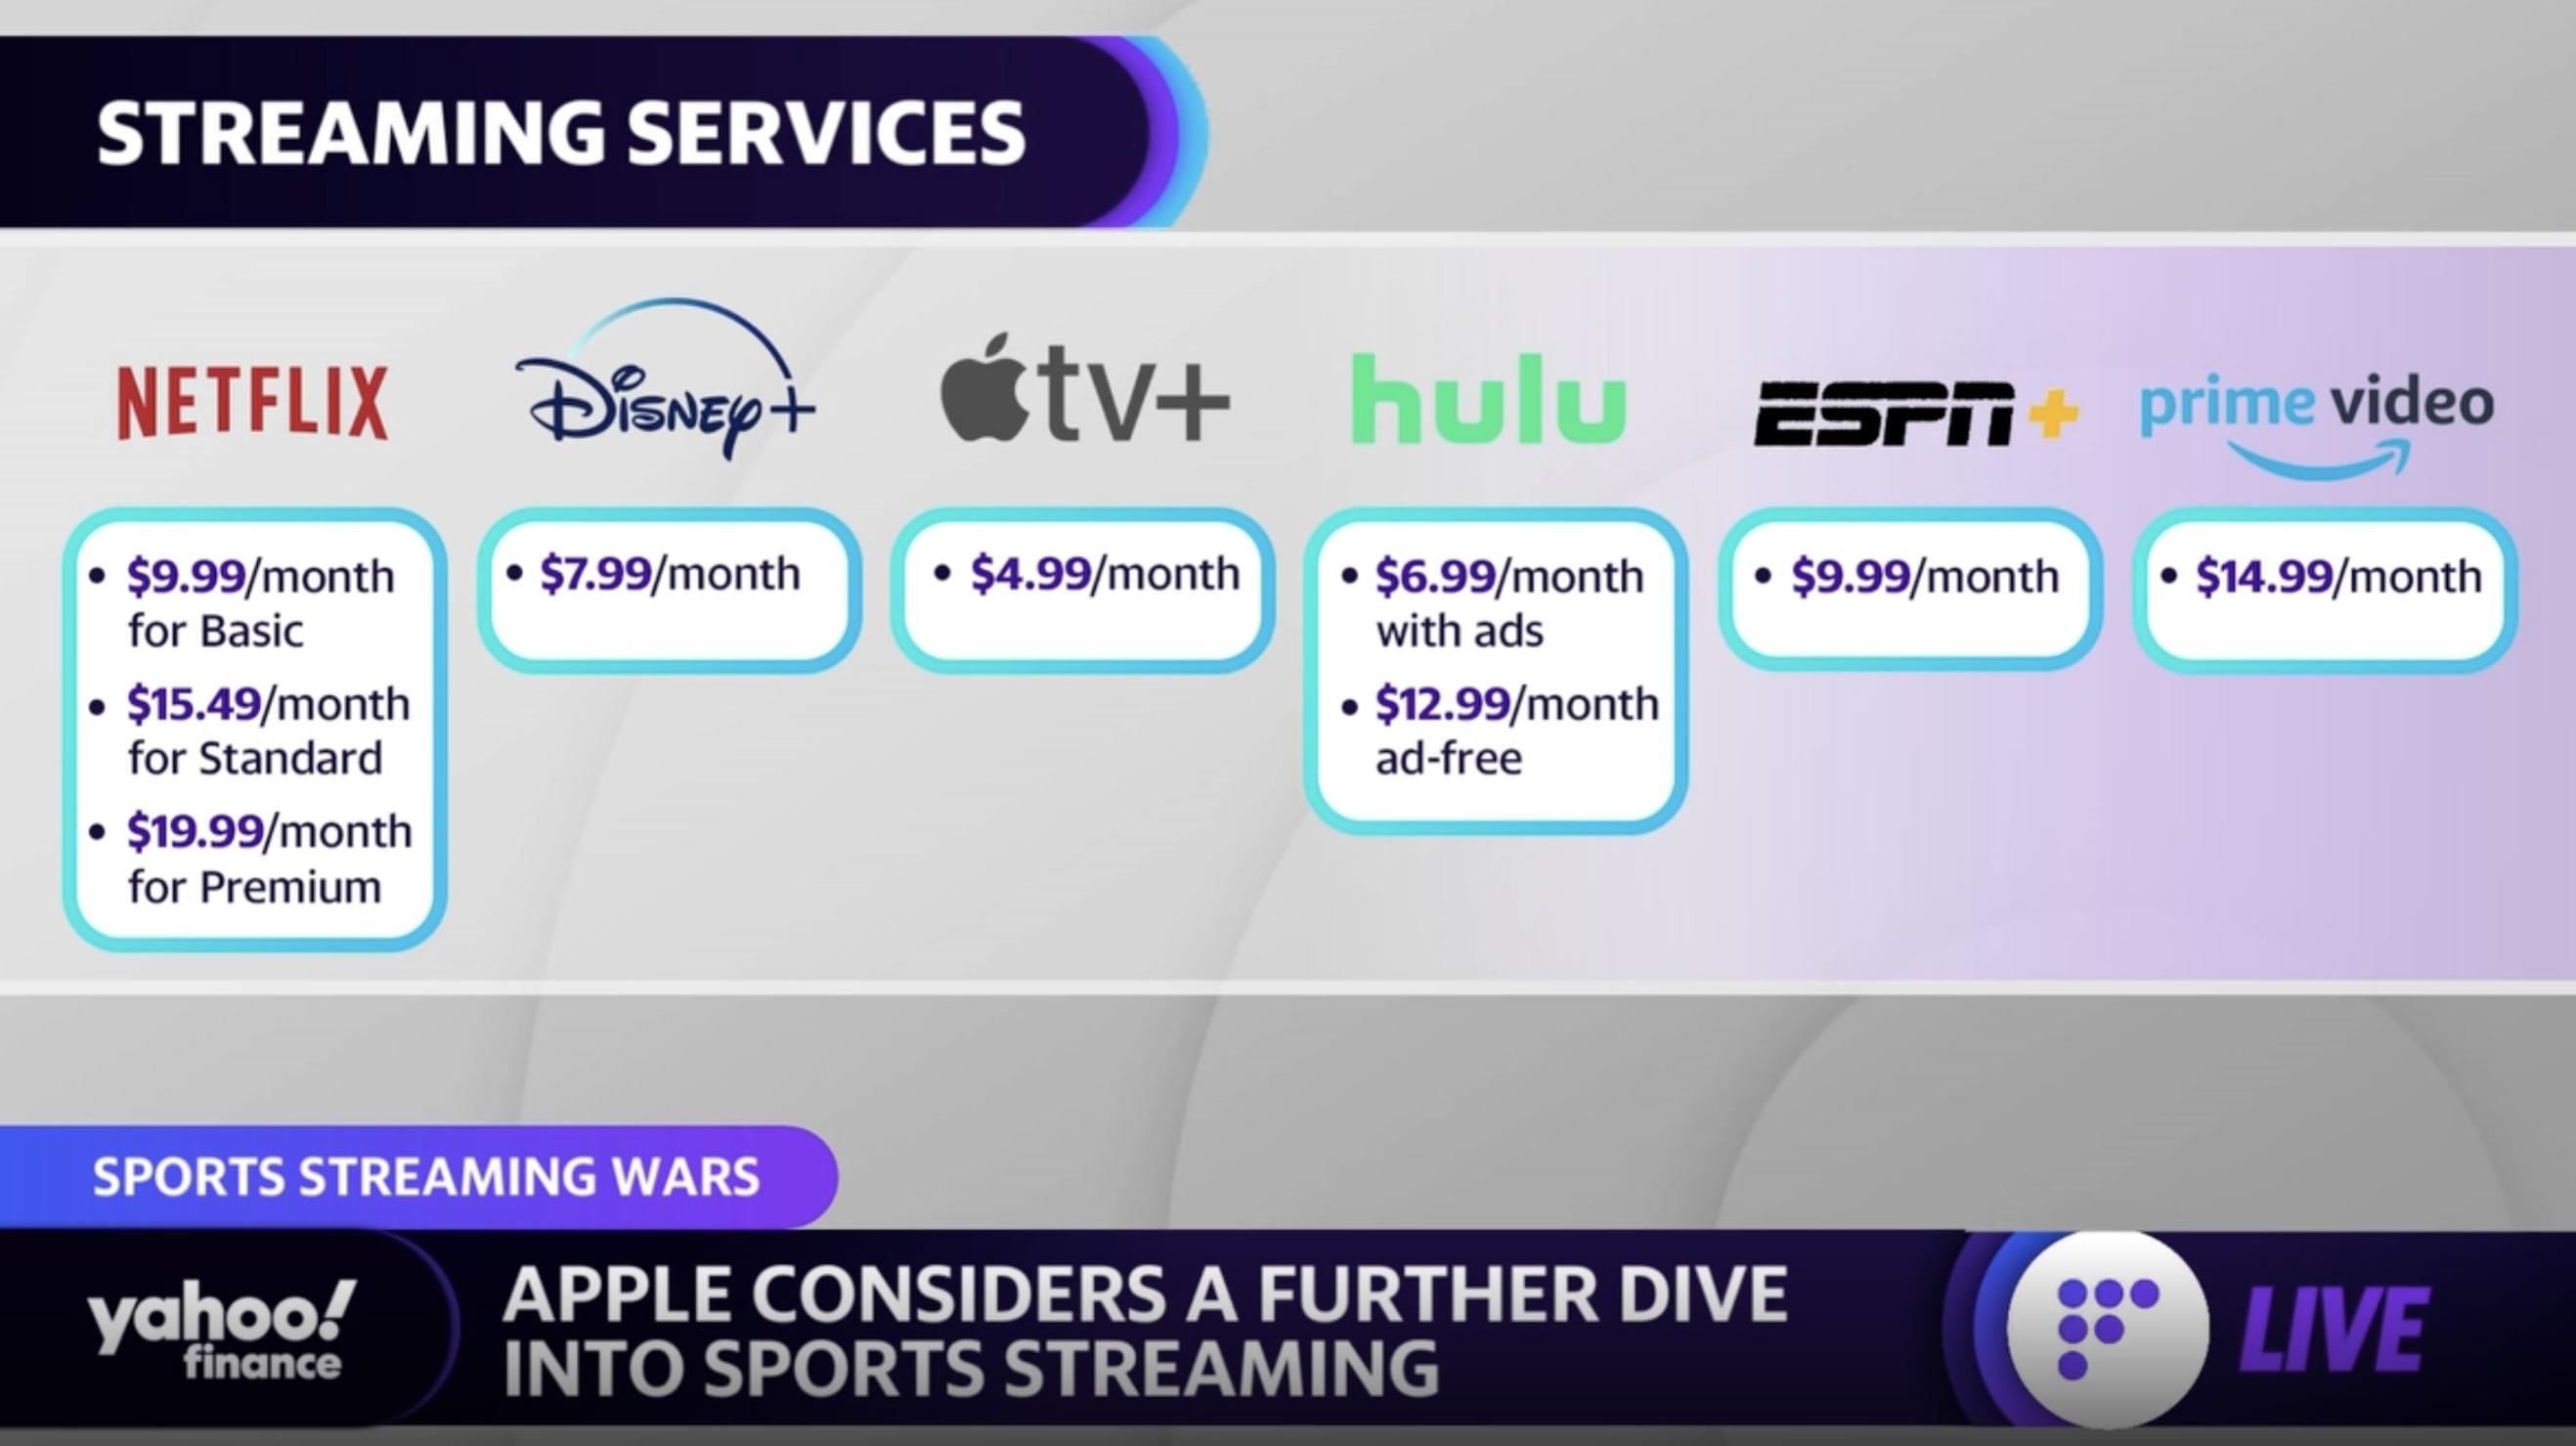 NFL considers Apple TV+ as a host for Sunday Ticket streaming